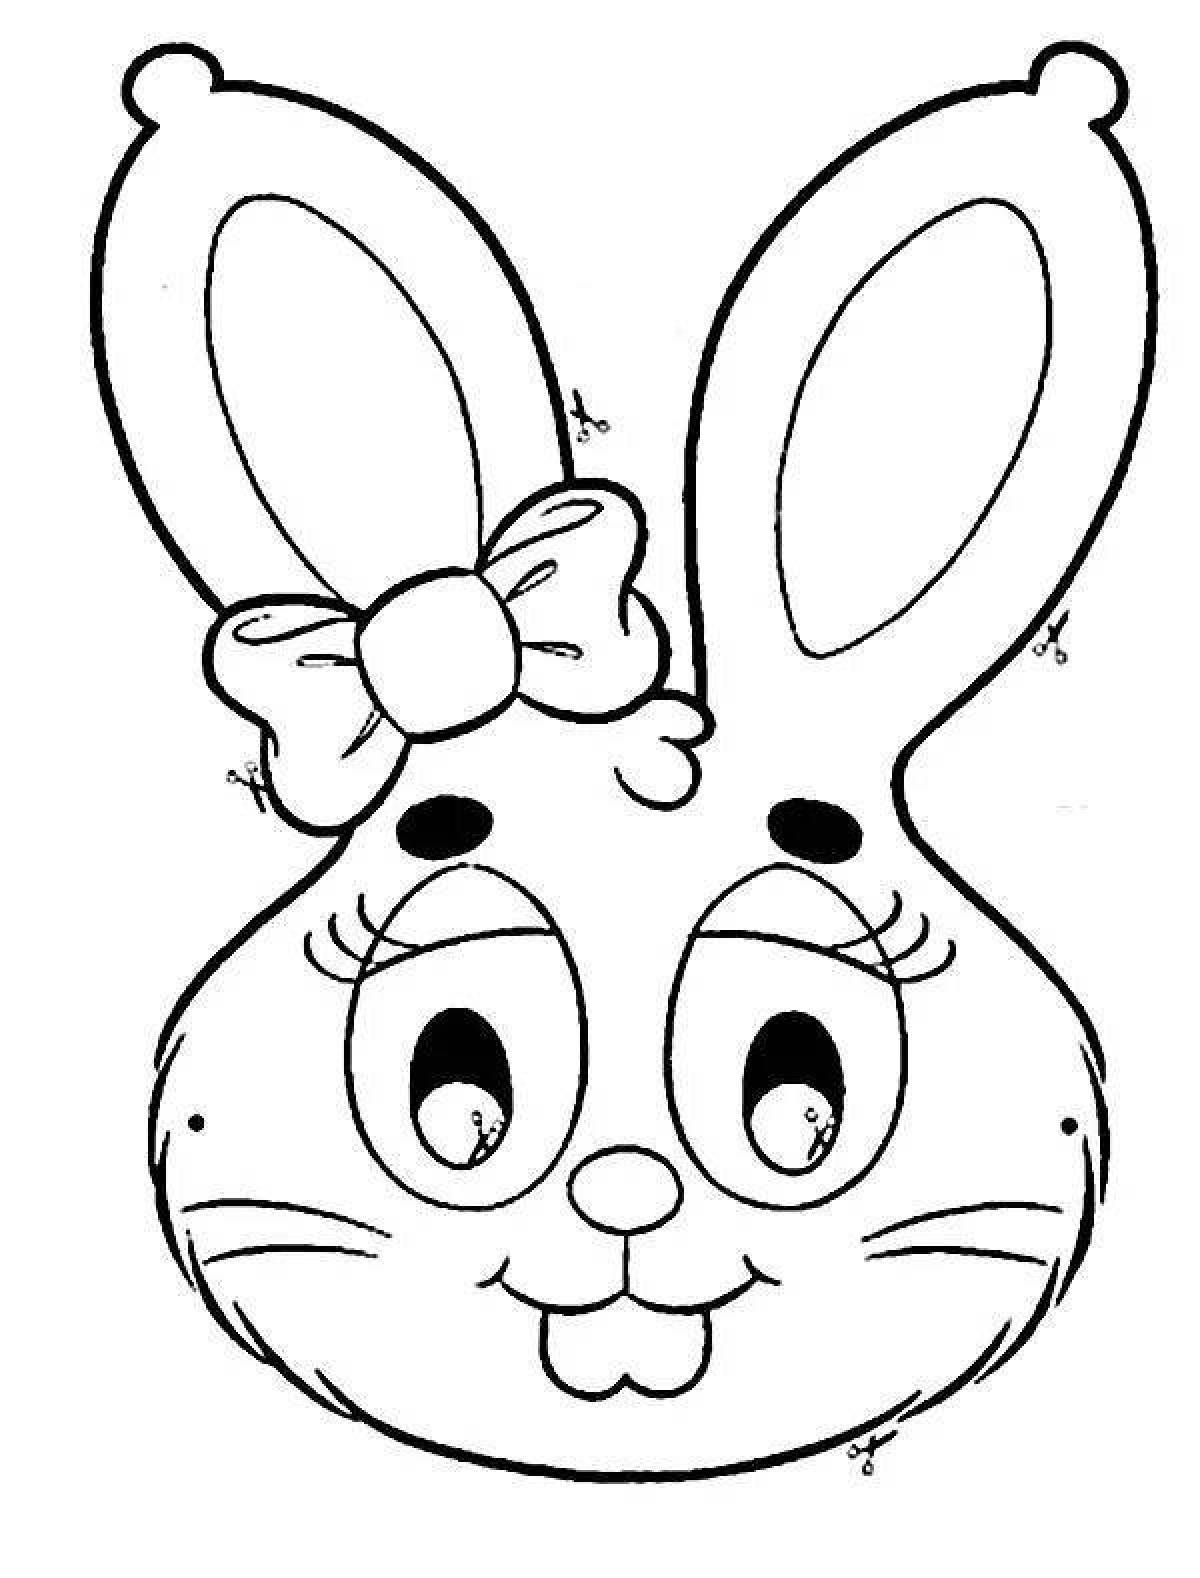 Charming hare coloring page